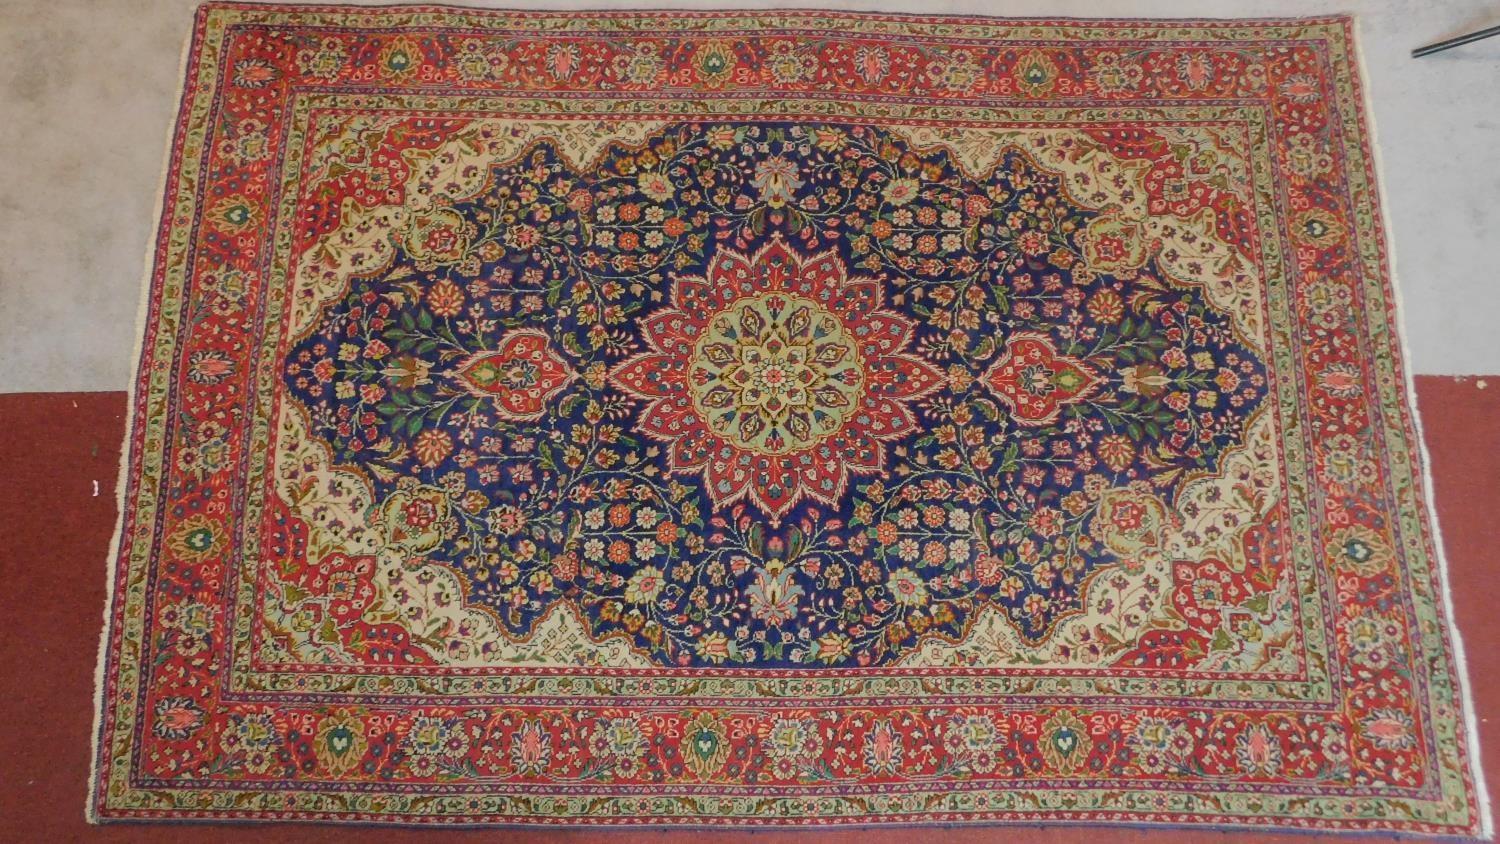 A Tabriz rug with central medallion and repeating floral motifs set on a predominantely rouge and